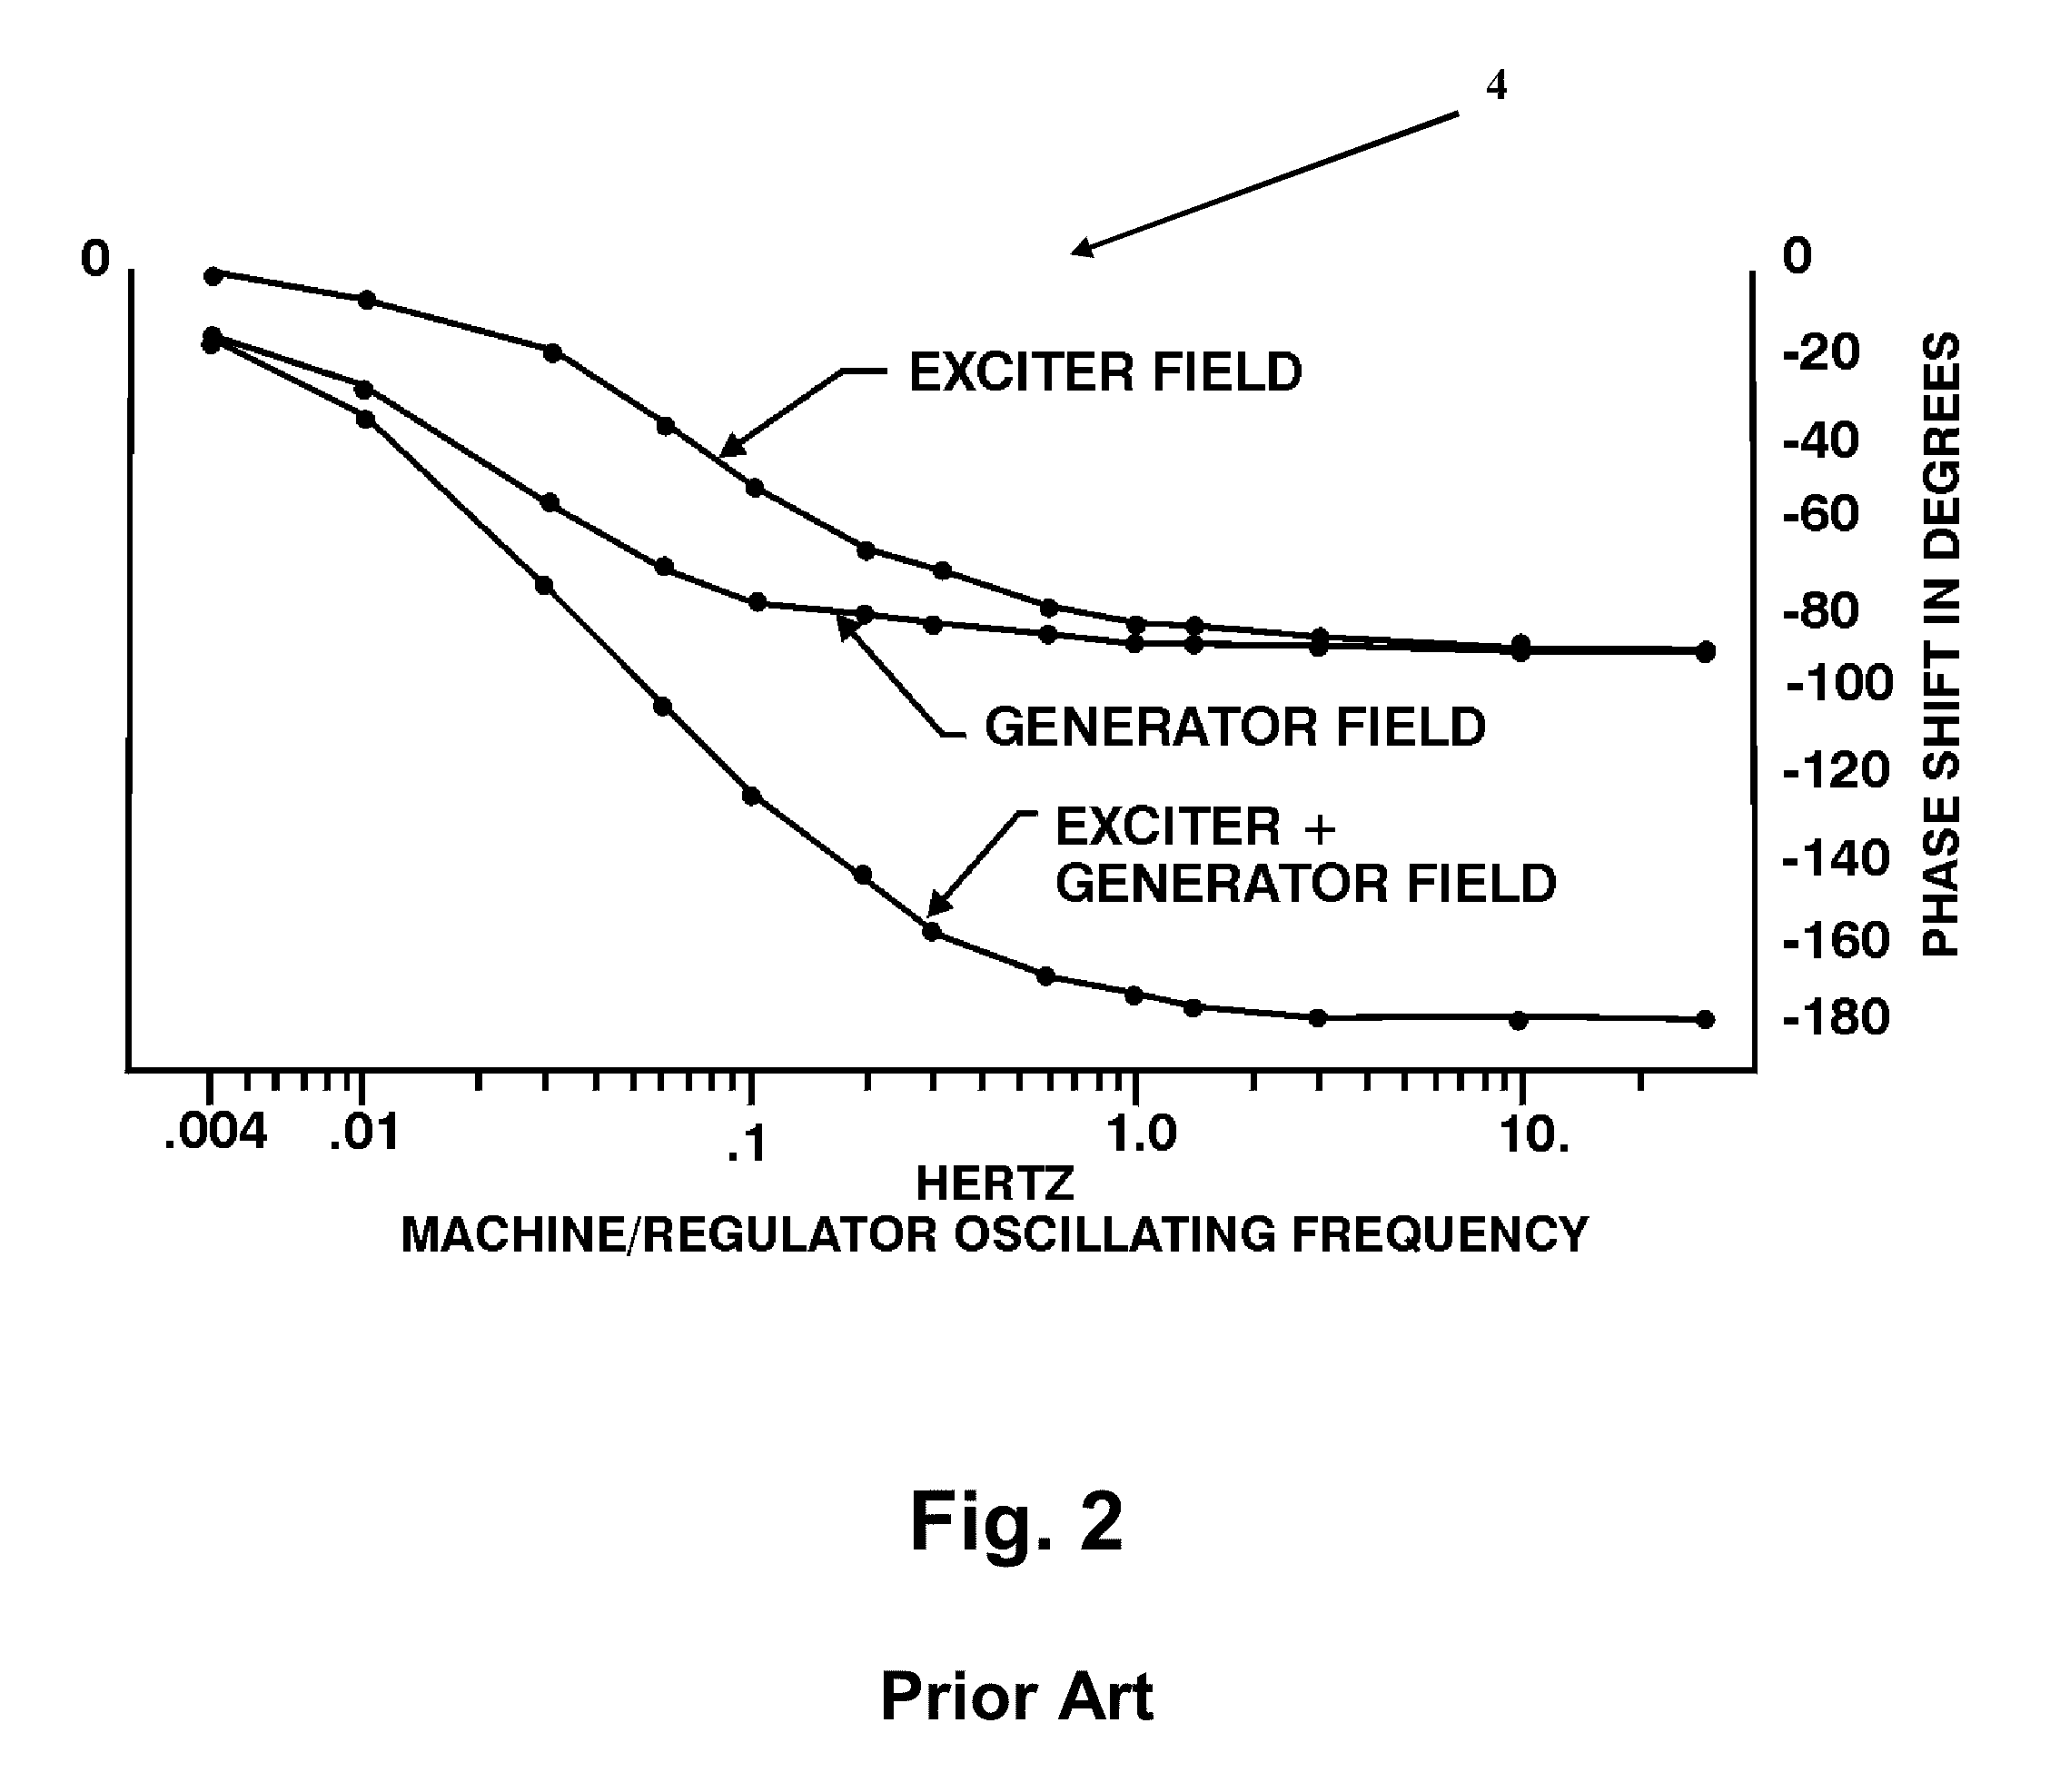 Digital excitation control system utilizing swarm intelligence and an associated method of use